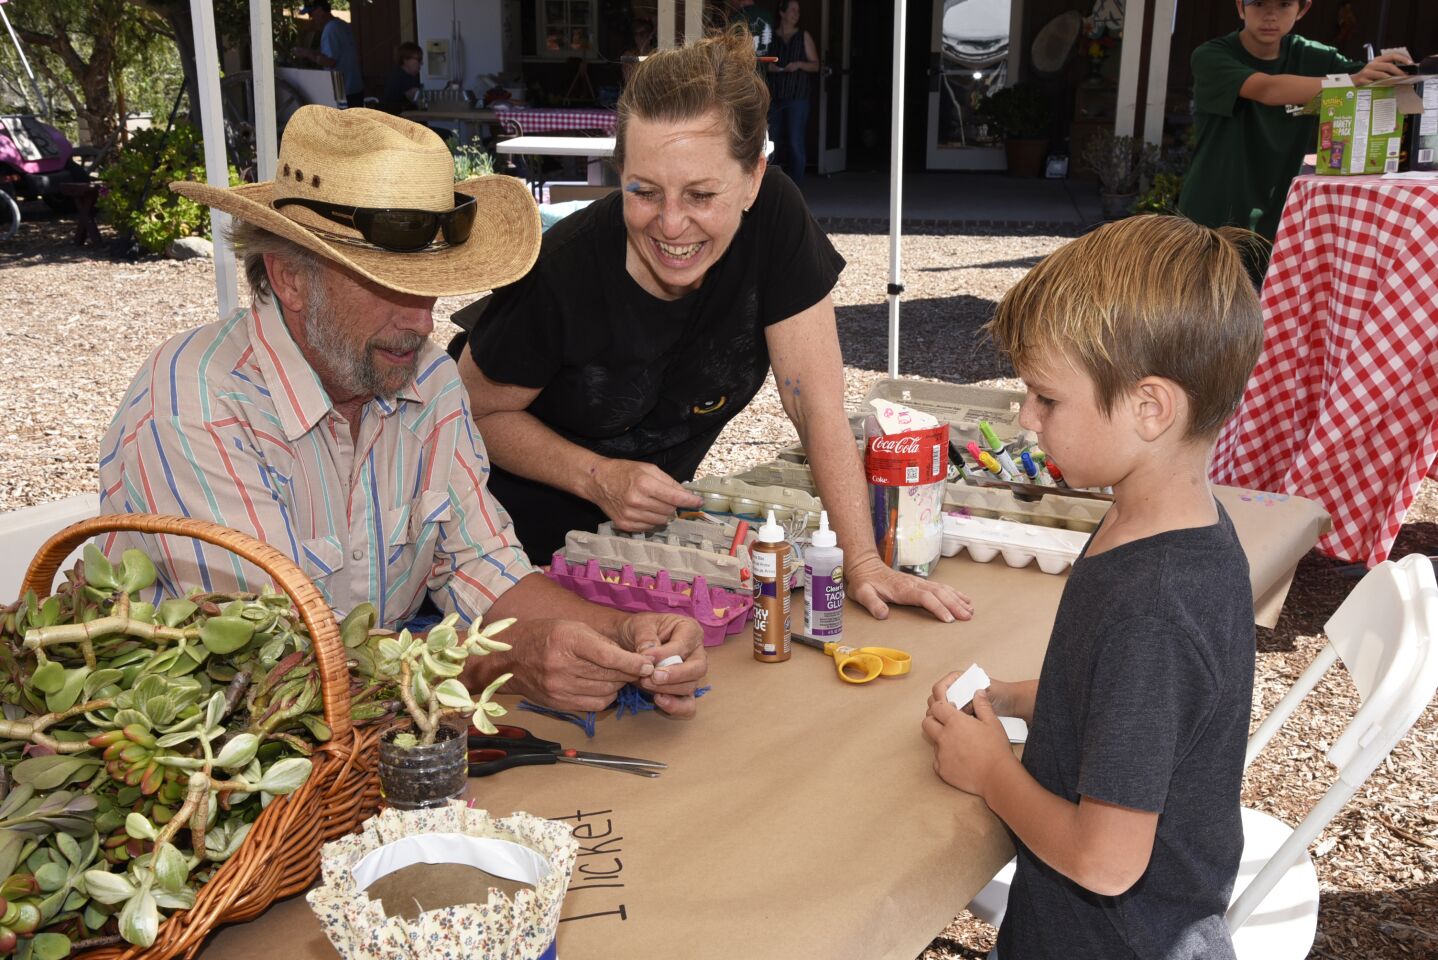 101 Artists’ Colony President Danny Salzhandler, Kristi Stone, and Braxton at one of the many hands on craft stations